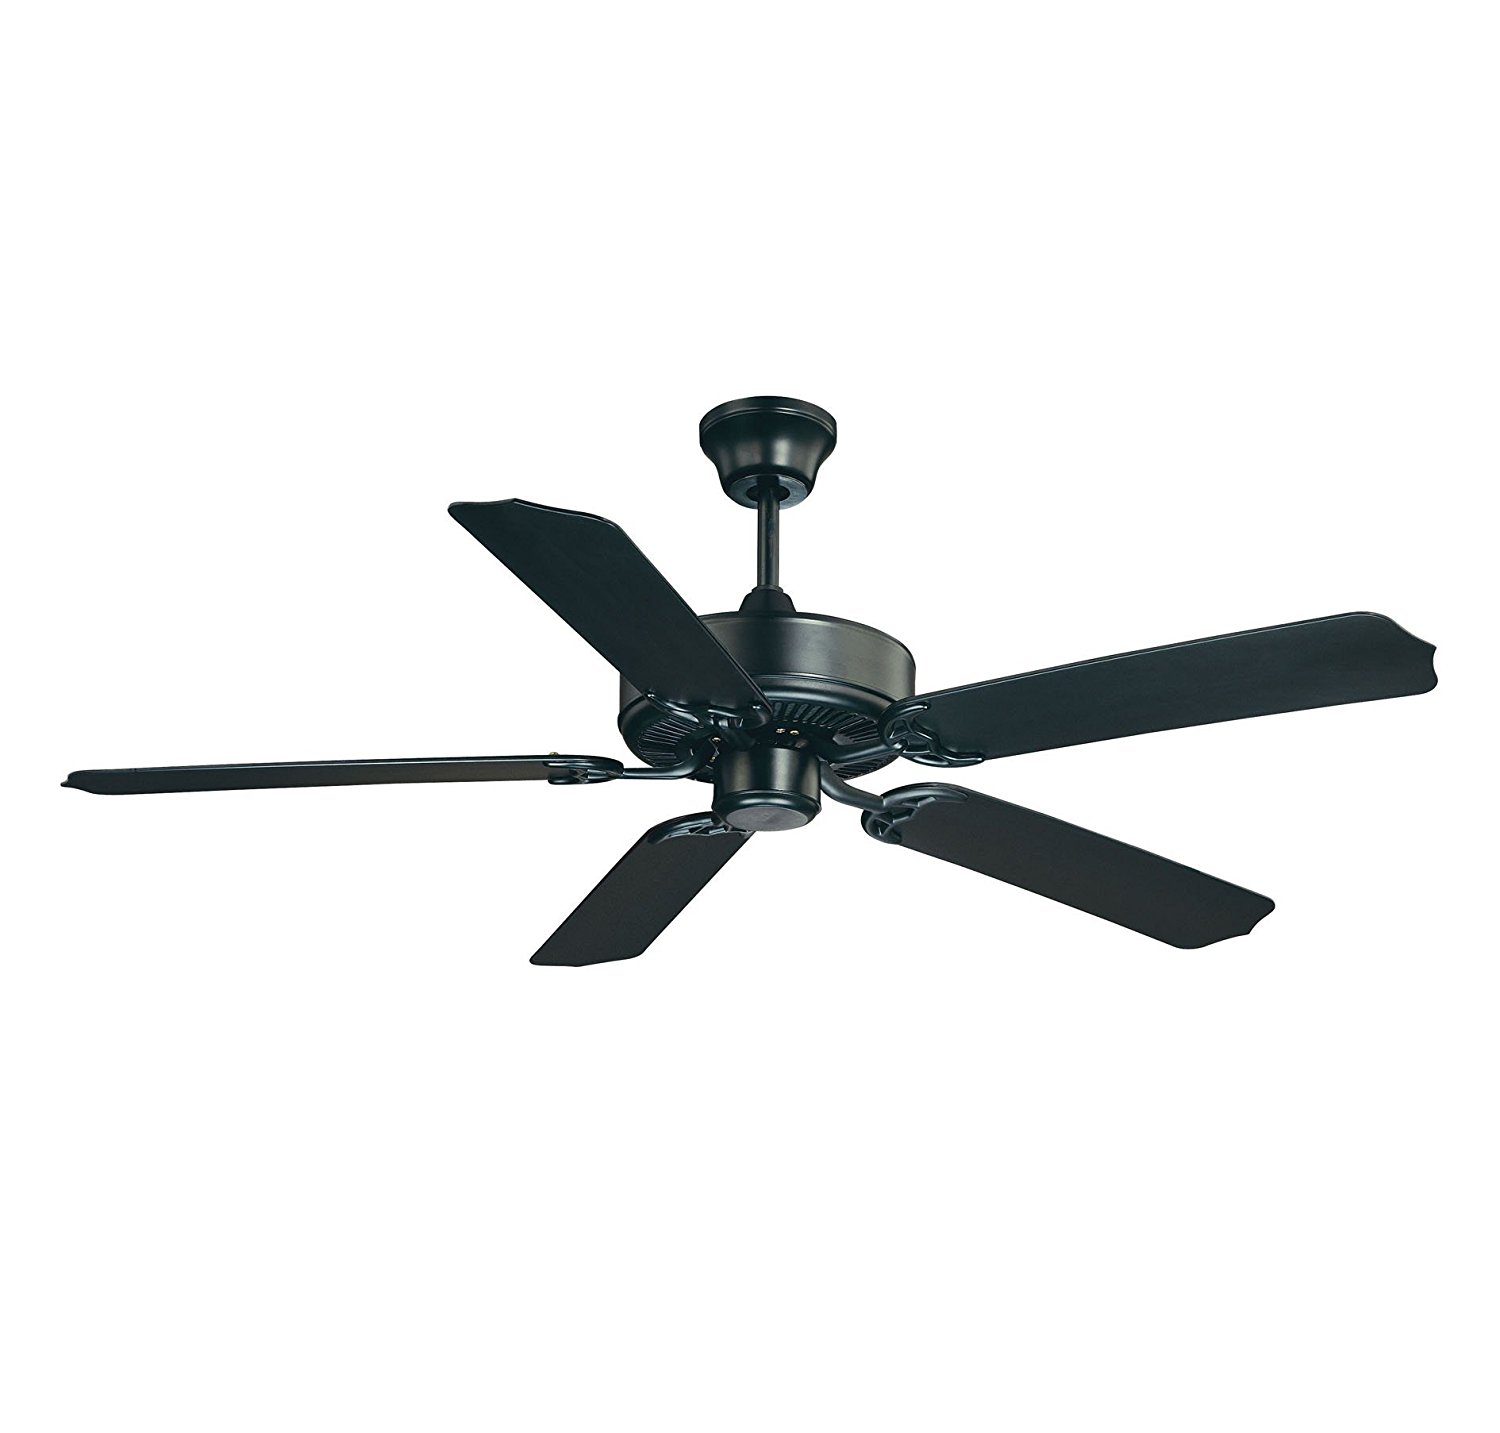 Savoy House Nomad 52" Outdoor Ceiling Fan in Flat Black 52-EOF-5MB-FB